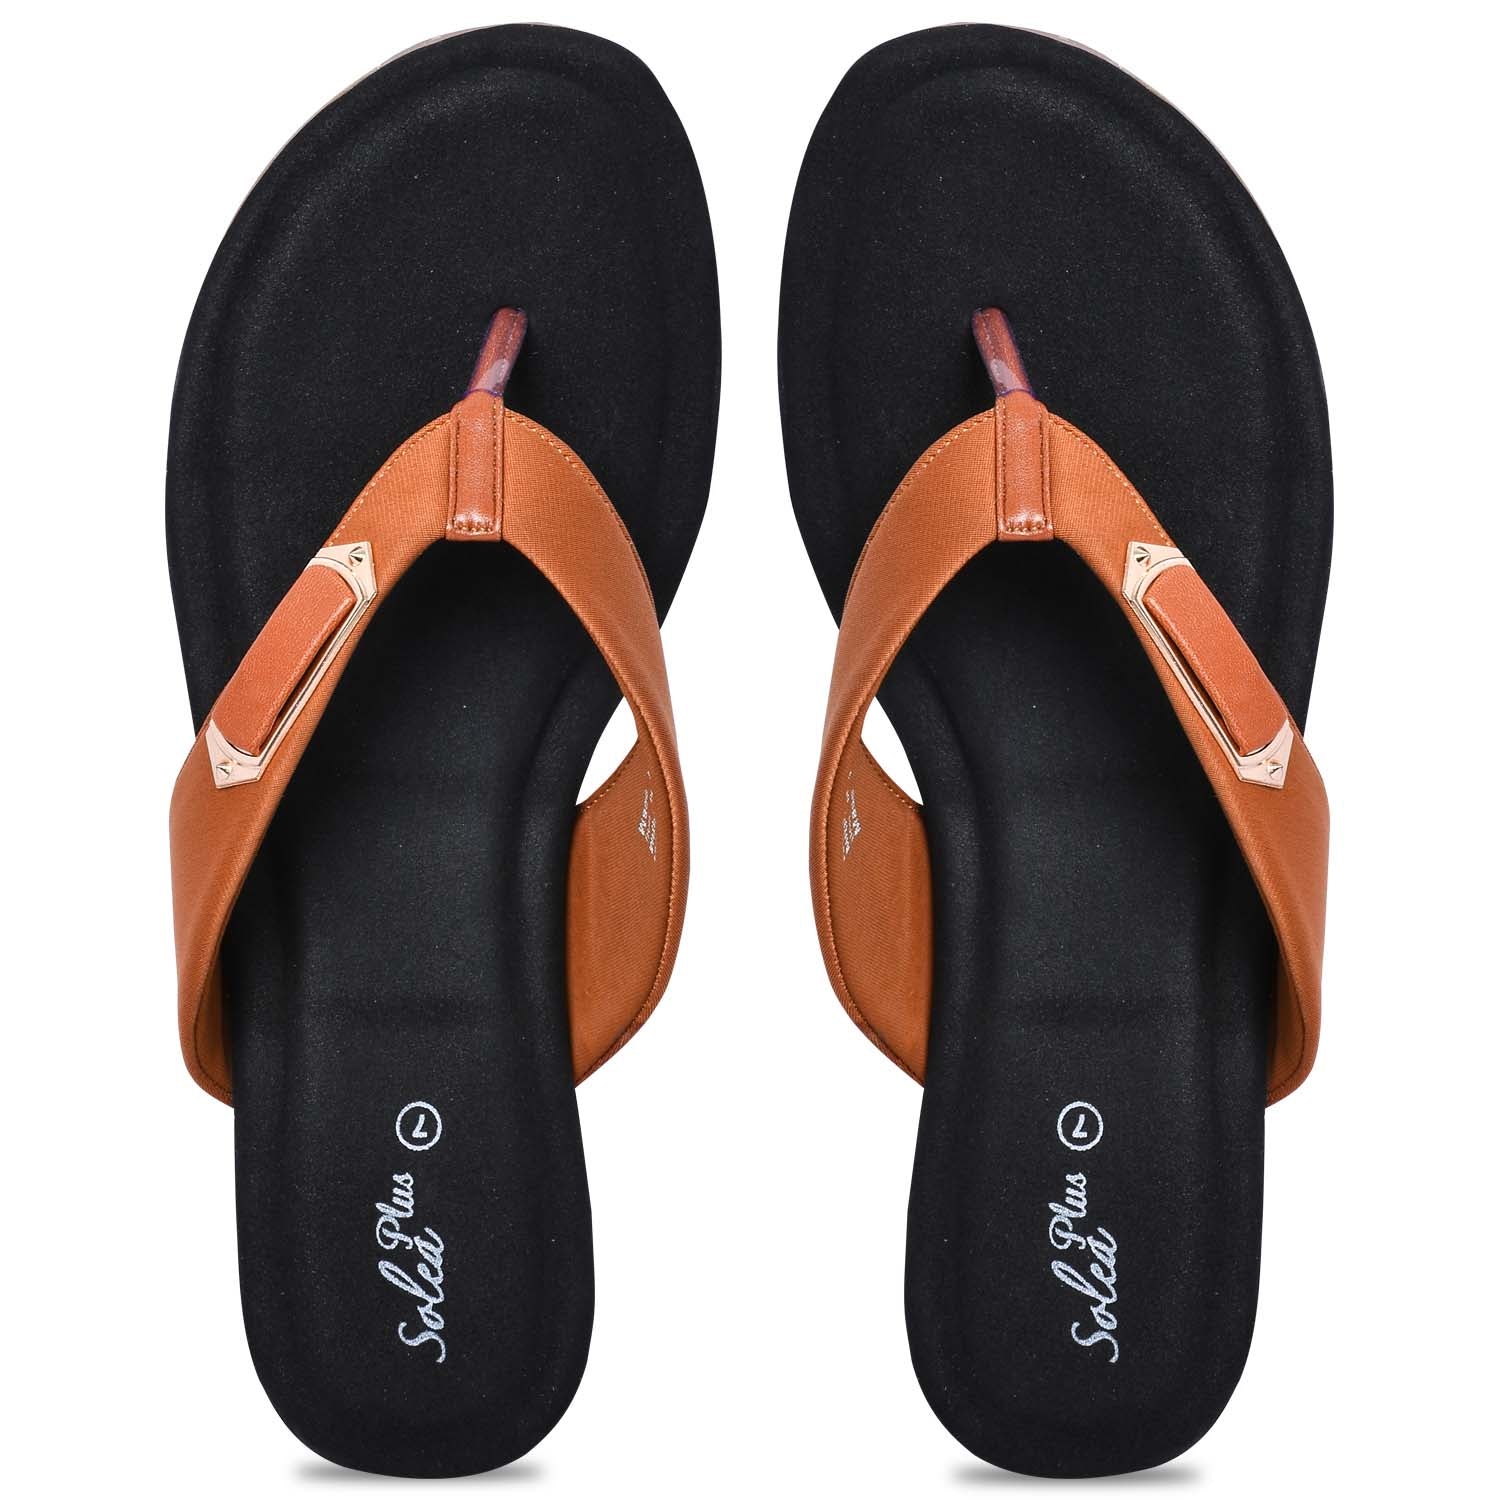 Paragon R1004L Women Sandals | Casual &amp; Formal Sandals | Stylish, Comfortable &amp; Durable | For Daily &amp; Occasion Wear